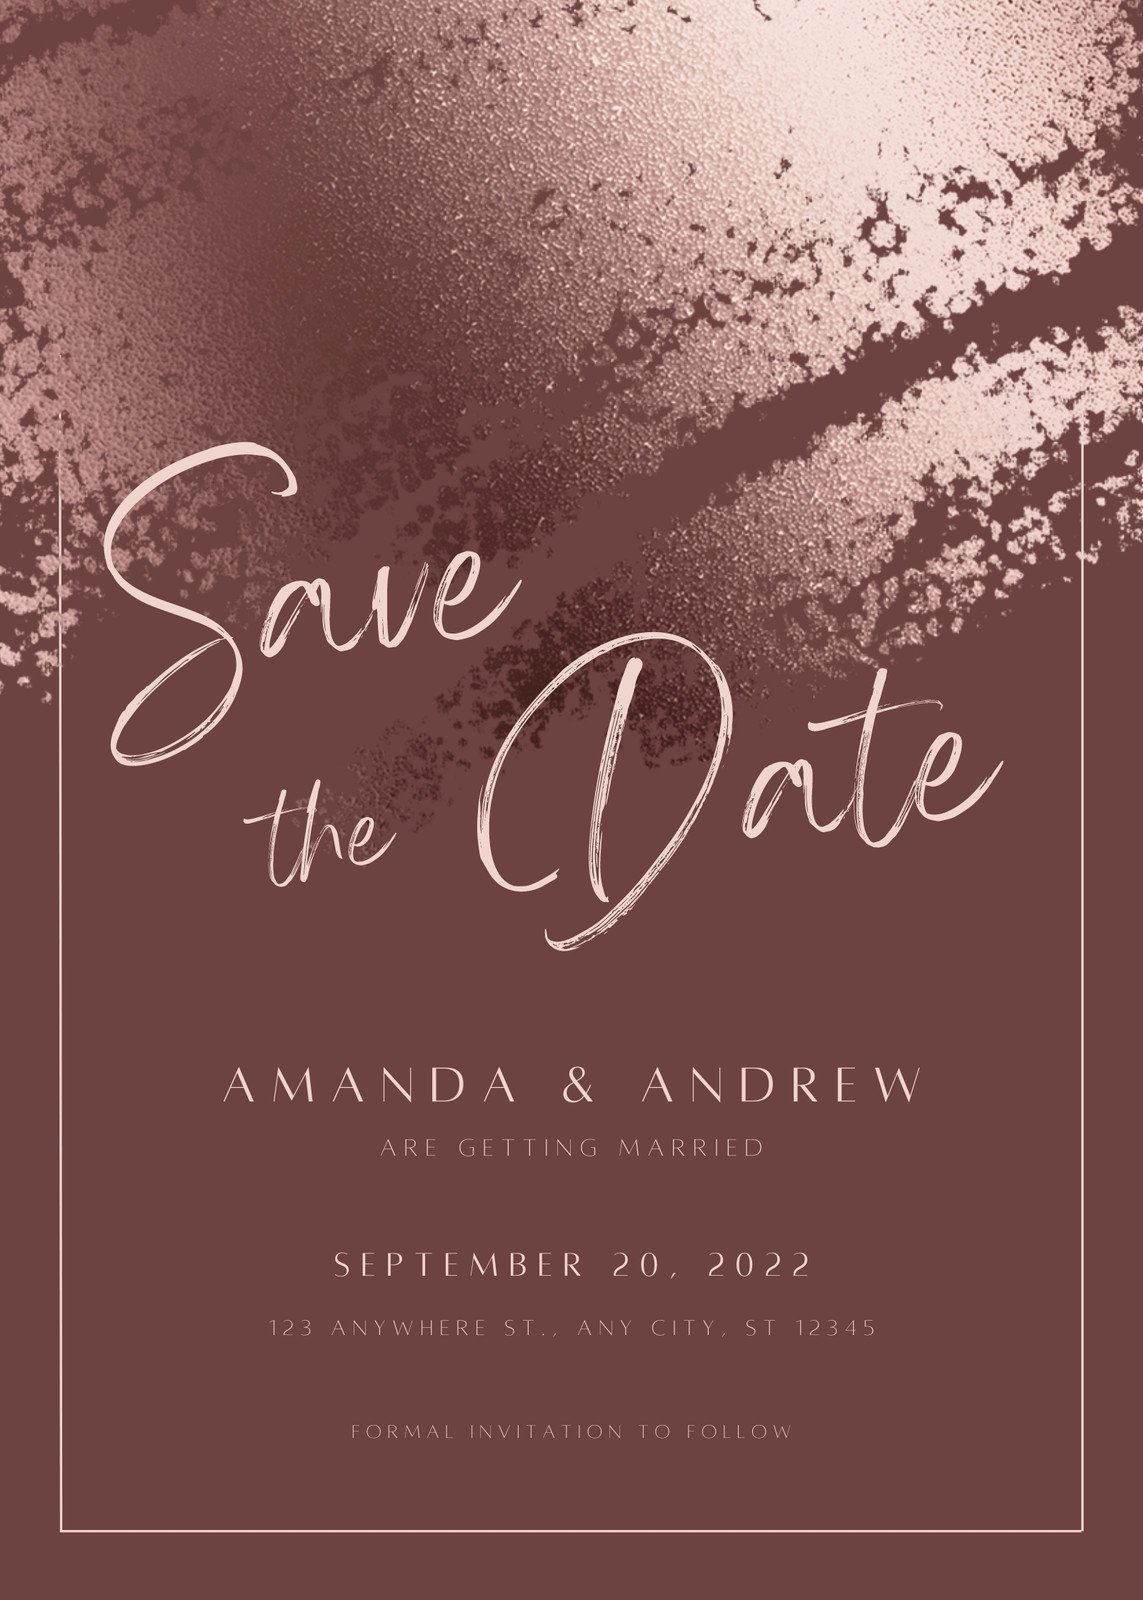 Large Collection of 999  Astonishing 4K Save the Date Images